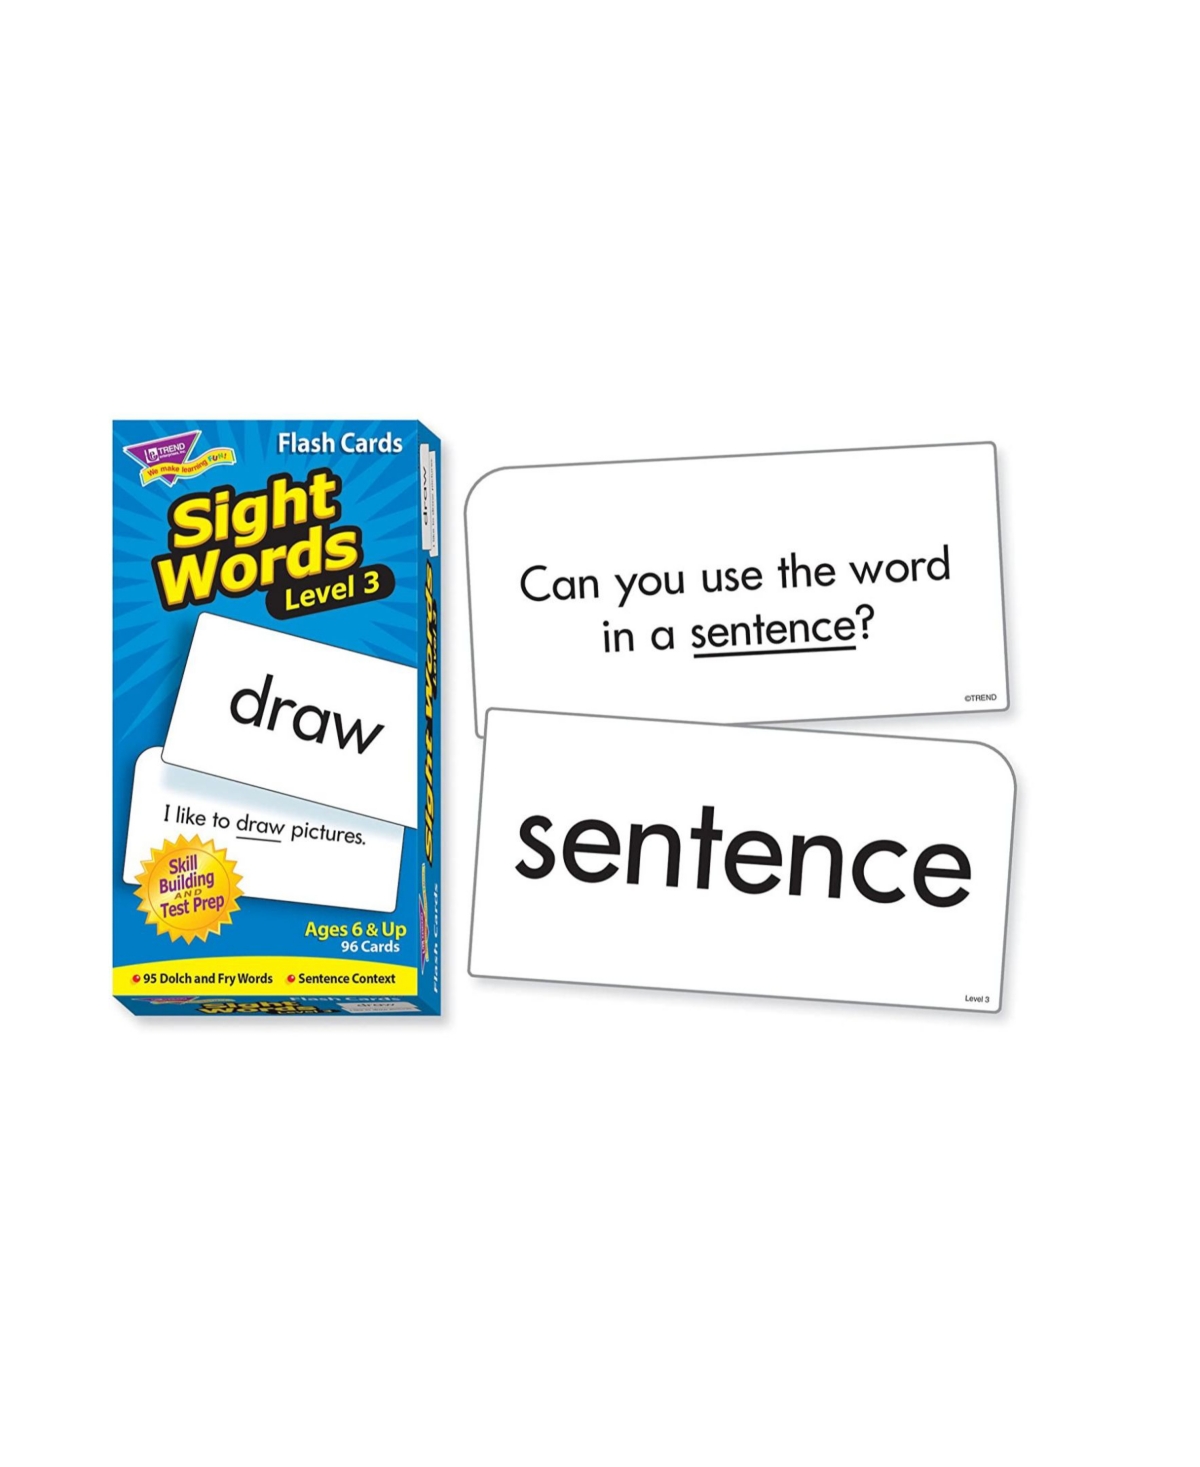 Shop Trend Enterprises Sight Words Level 3 Skill Drill Flash Cards In Open Misce